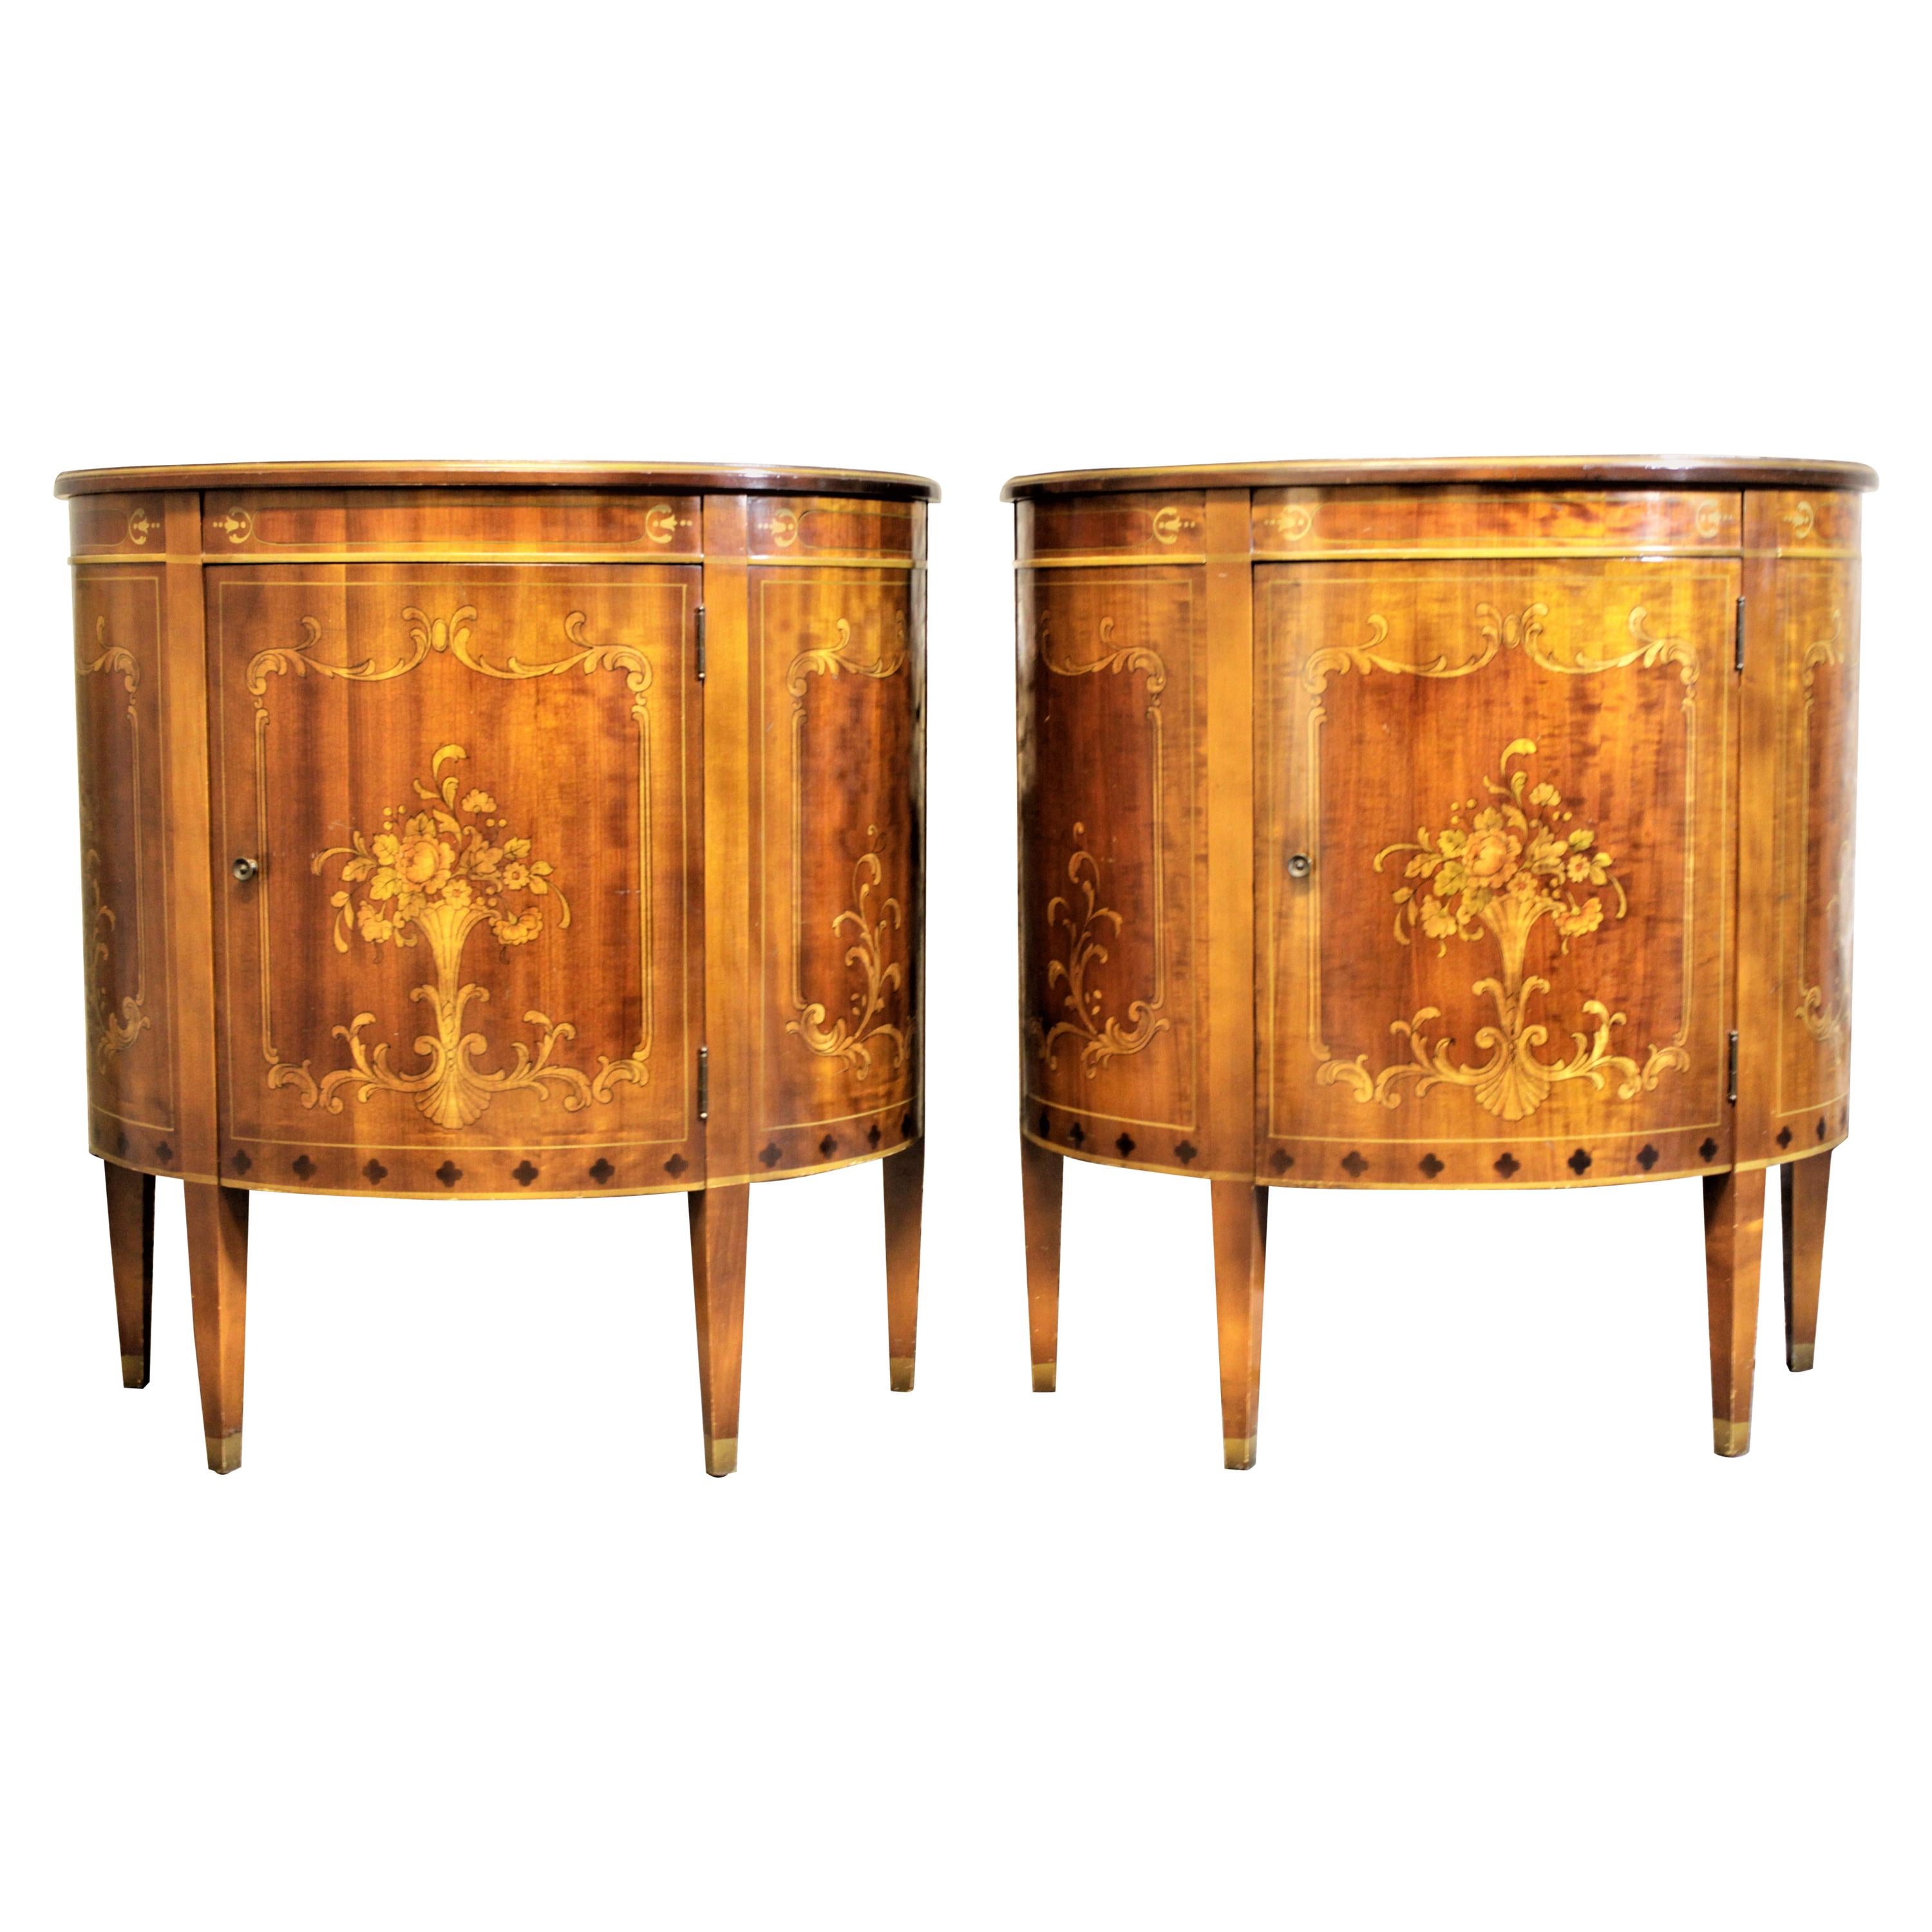 Pair of Painted Fruitwood Demilune Cabinets by Imperial of Grand Rapids